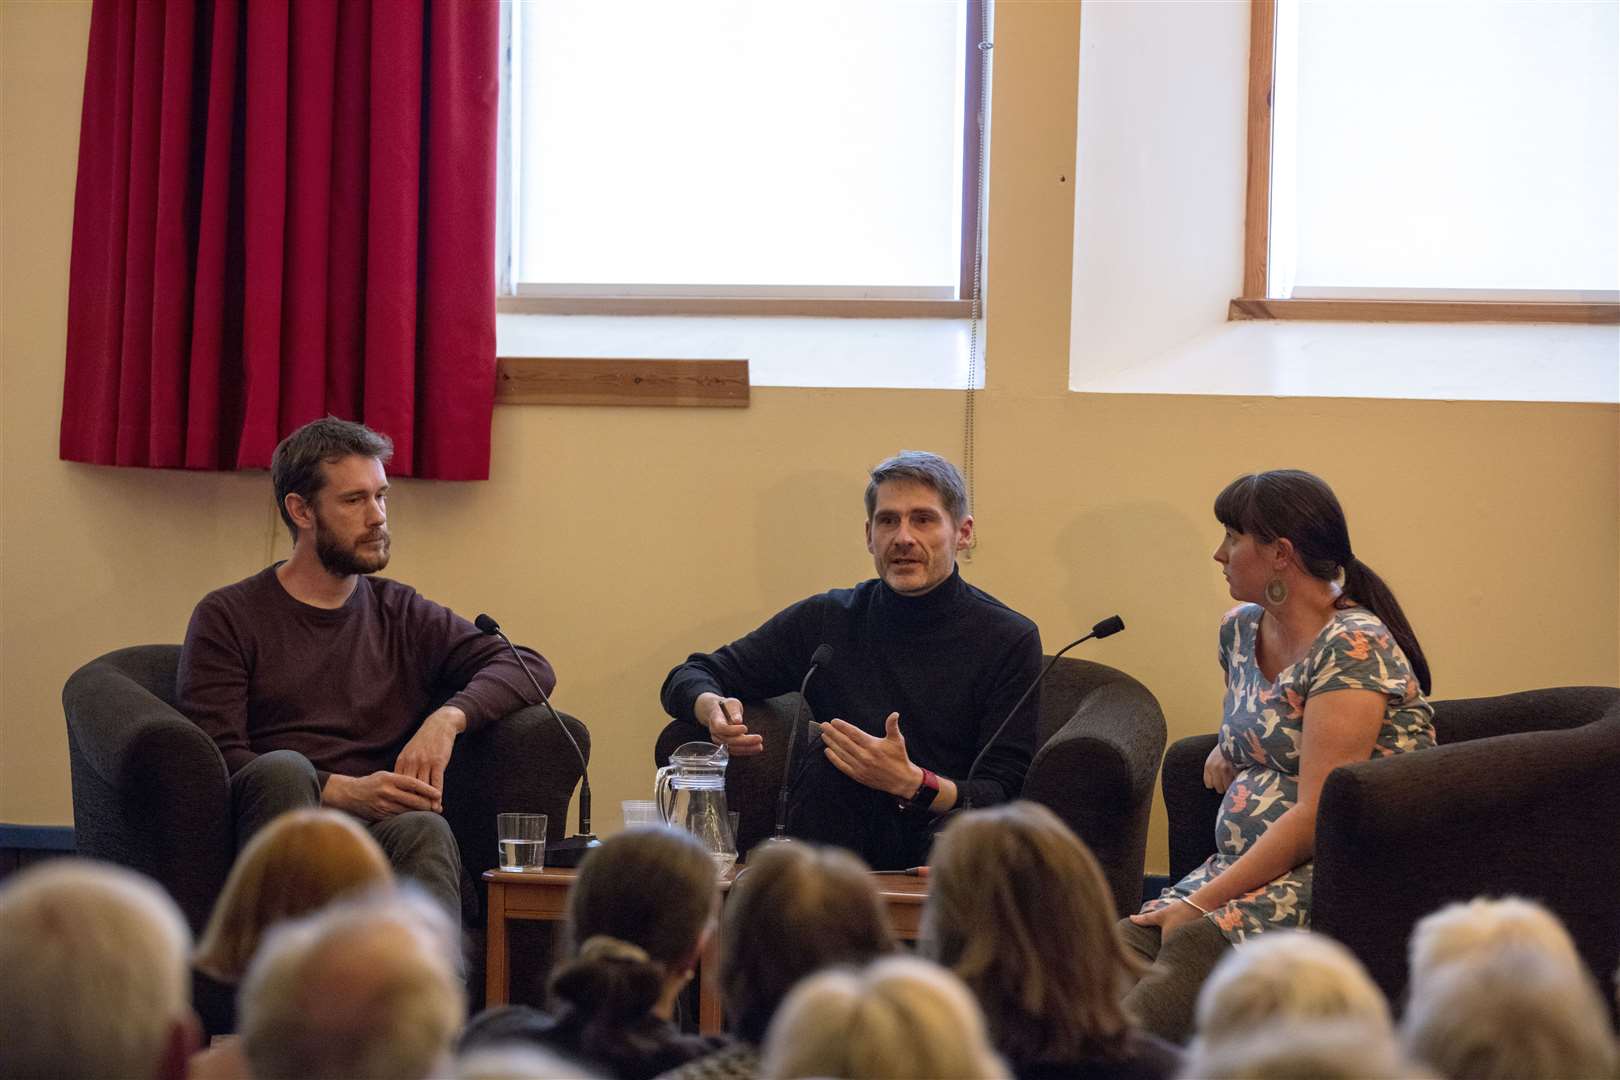 The 2022 Ullapool Book Festival will se the return of literary chat in front of a live audience.